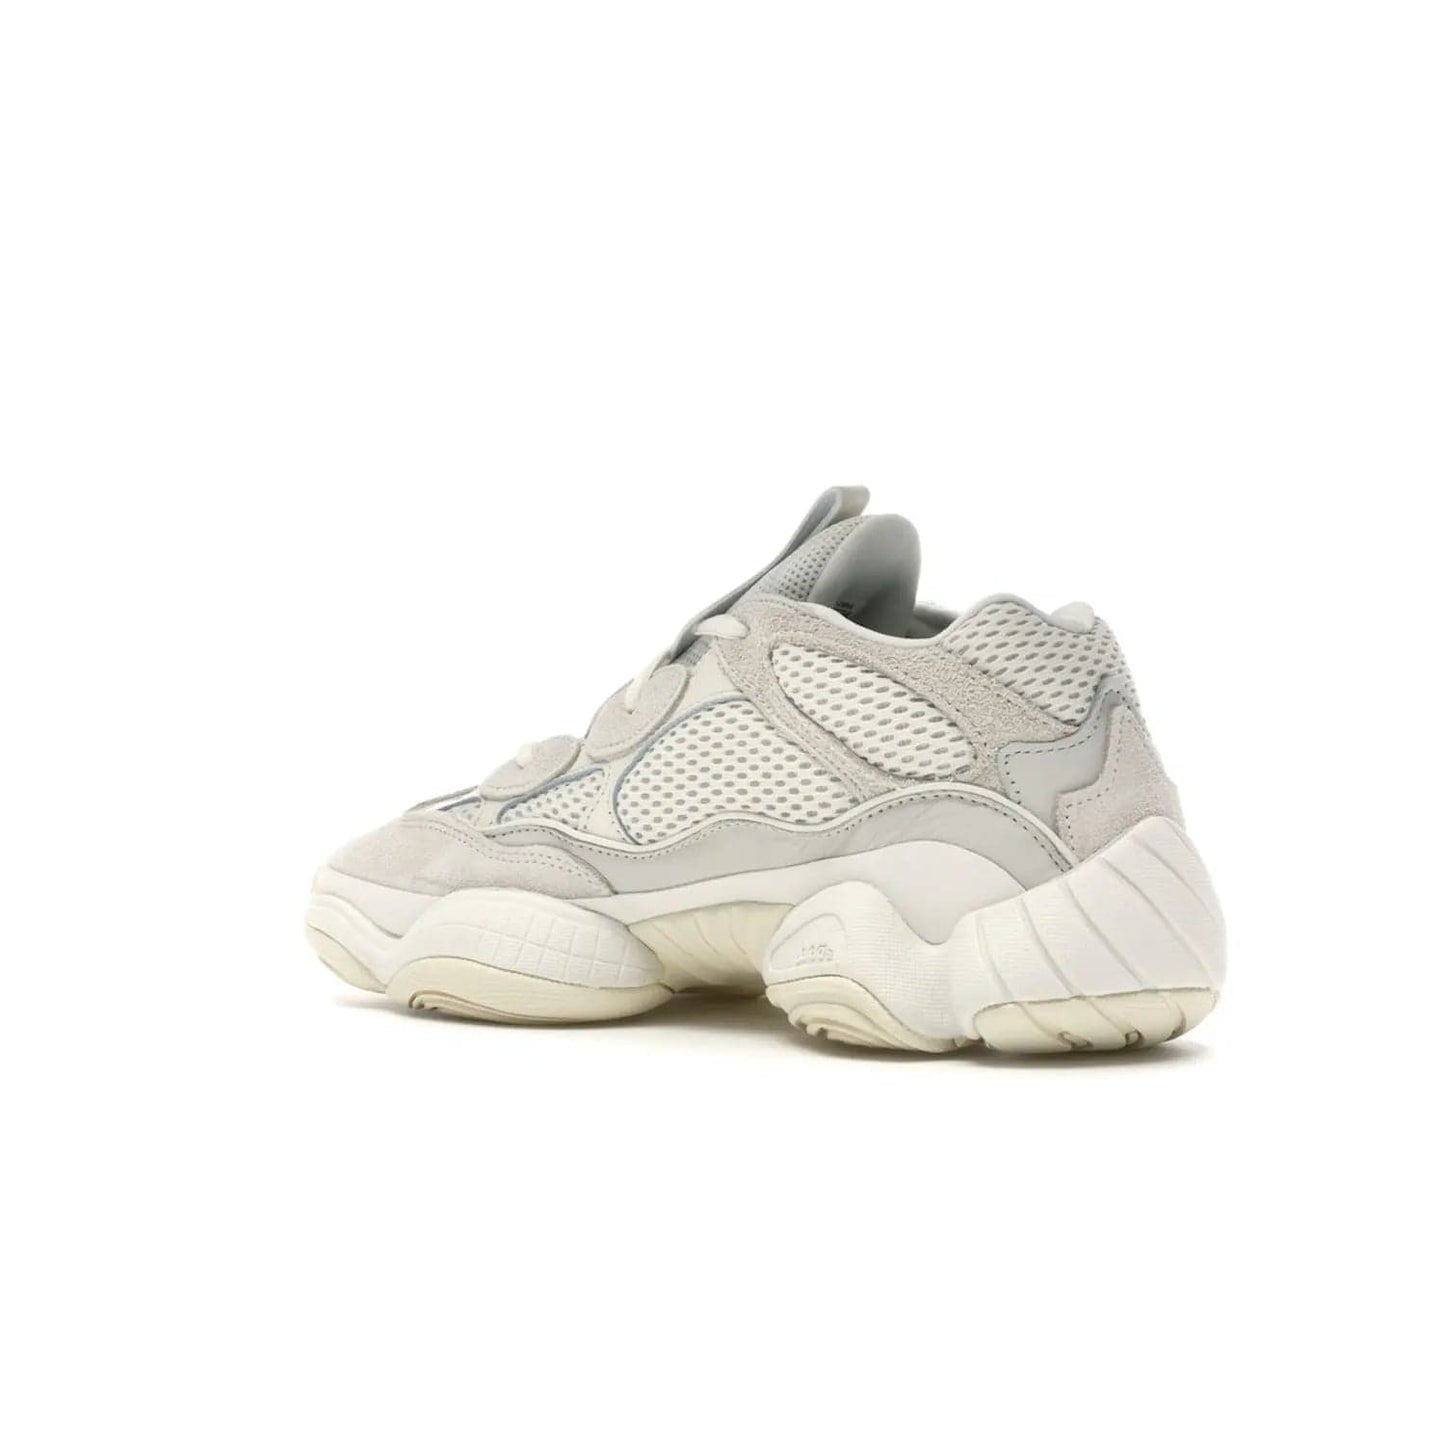 adidas Yeezy 500 Bone White - Image 23 - Only at www.BallersClubKickz.com - Classic look perfect for any sneaker collection. The adidas Yeezy 500 "Bone White" blends a white mesh upper with suede overlays & a chunky midsole inspired by the Adidas KB3. Complimented by a tonal-cream outsole, this timeless style is a must-have.